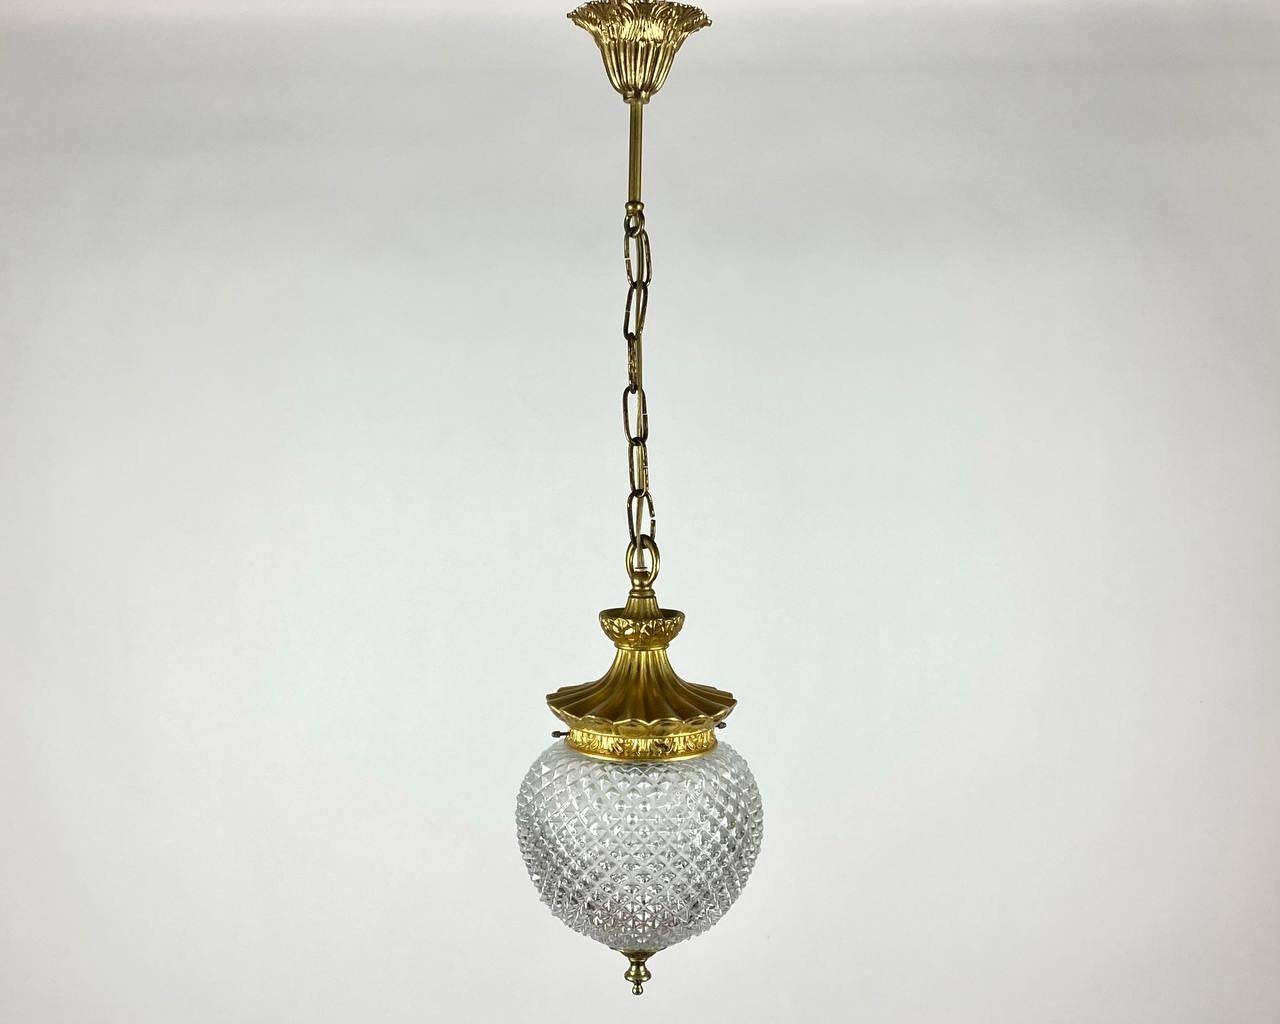 Vintage textured glass and gilded brass ceiling chandelier or lantern. 

 Beautifully detailed, hanging lamp, lantern. 

The textured glass plafond is set in a gold-plated brass rim.

 The gilded parts are beautifully decorated and the glass